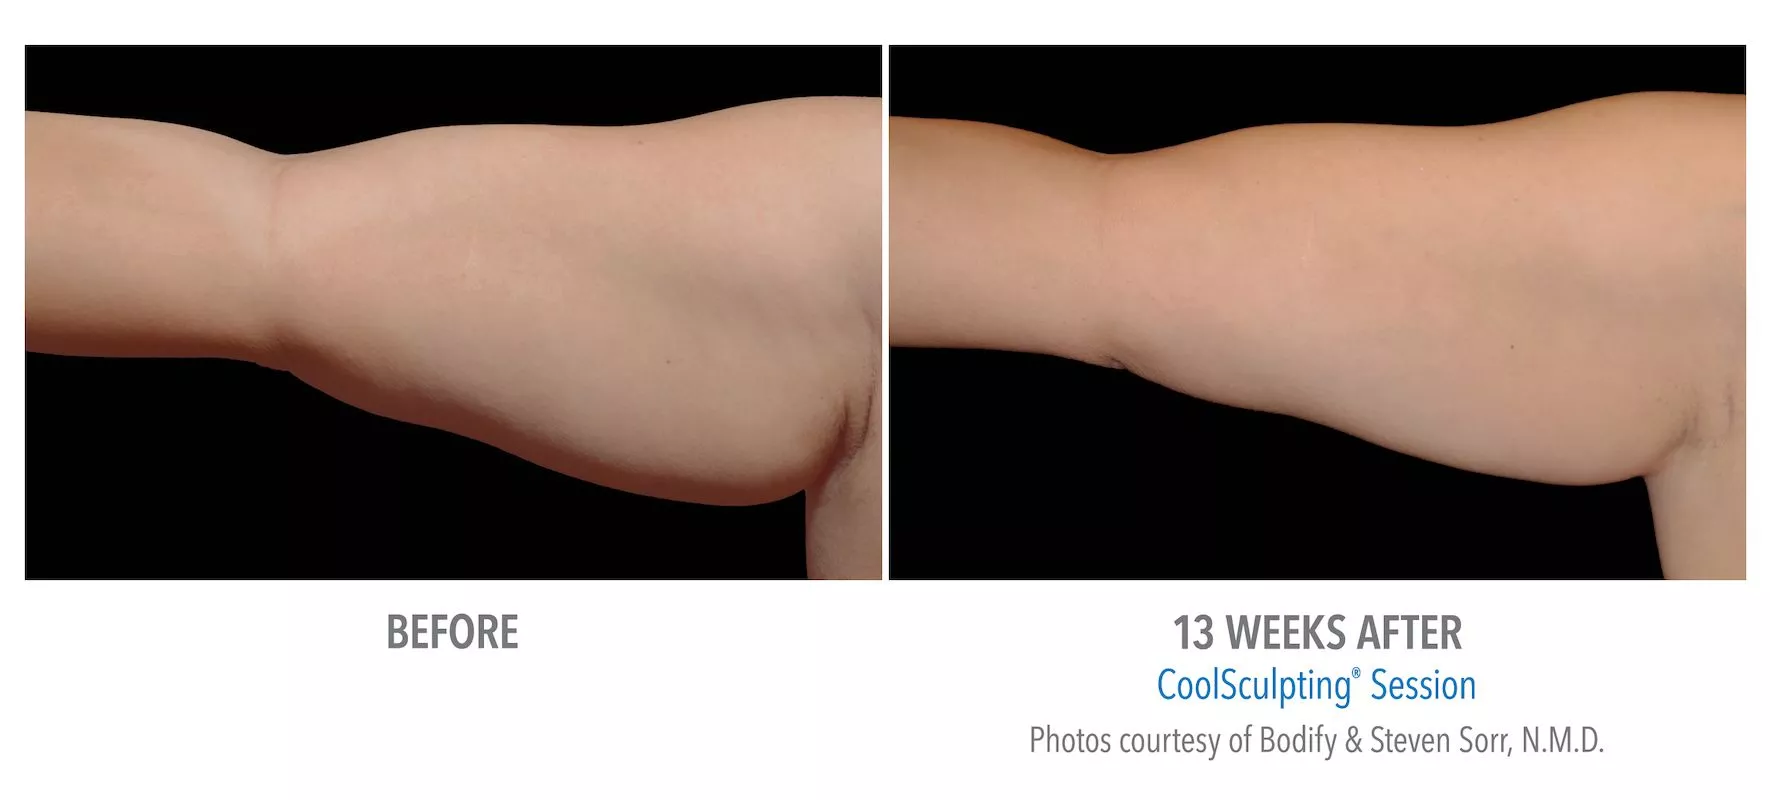 Female CoolSculpting patient in Las Vegas. Before and after photo of arms 13 weeks post CoolSculpting treatment.